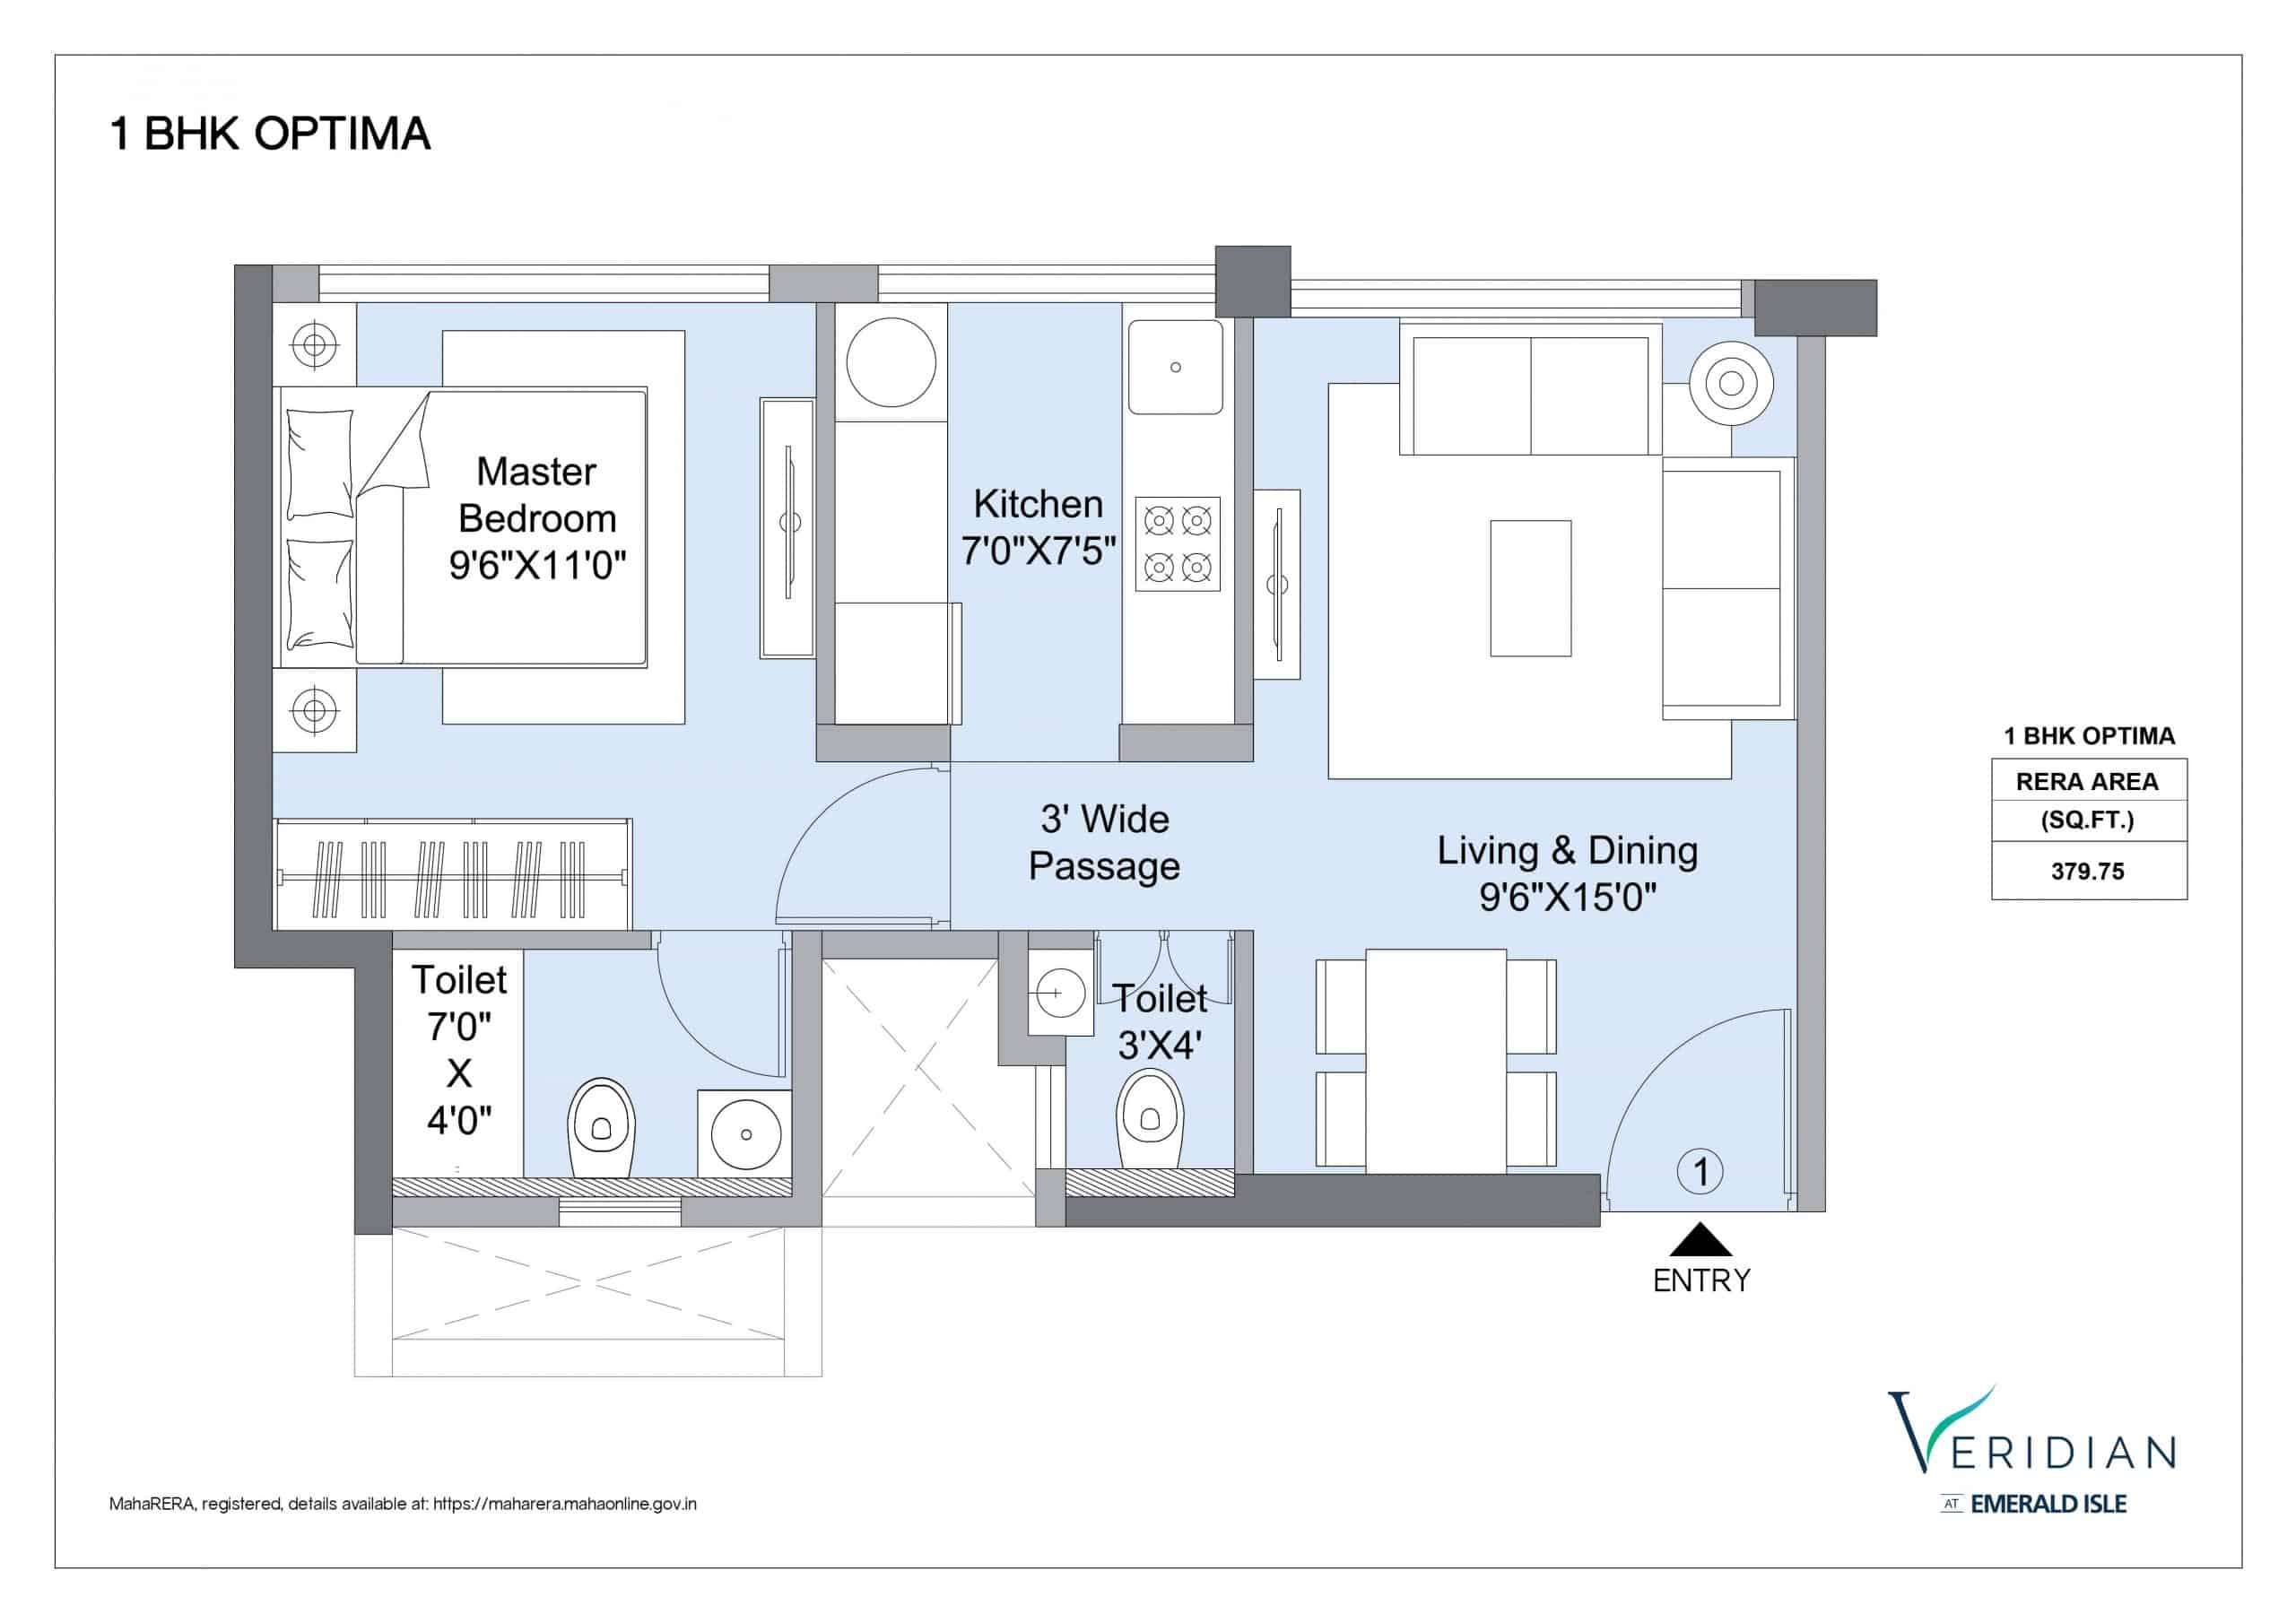 1 BHK optima at Veridian scaled | L&T Realty